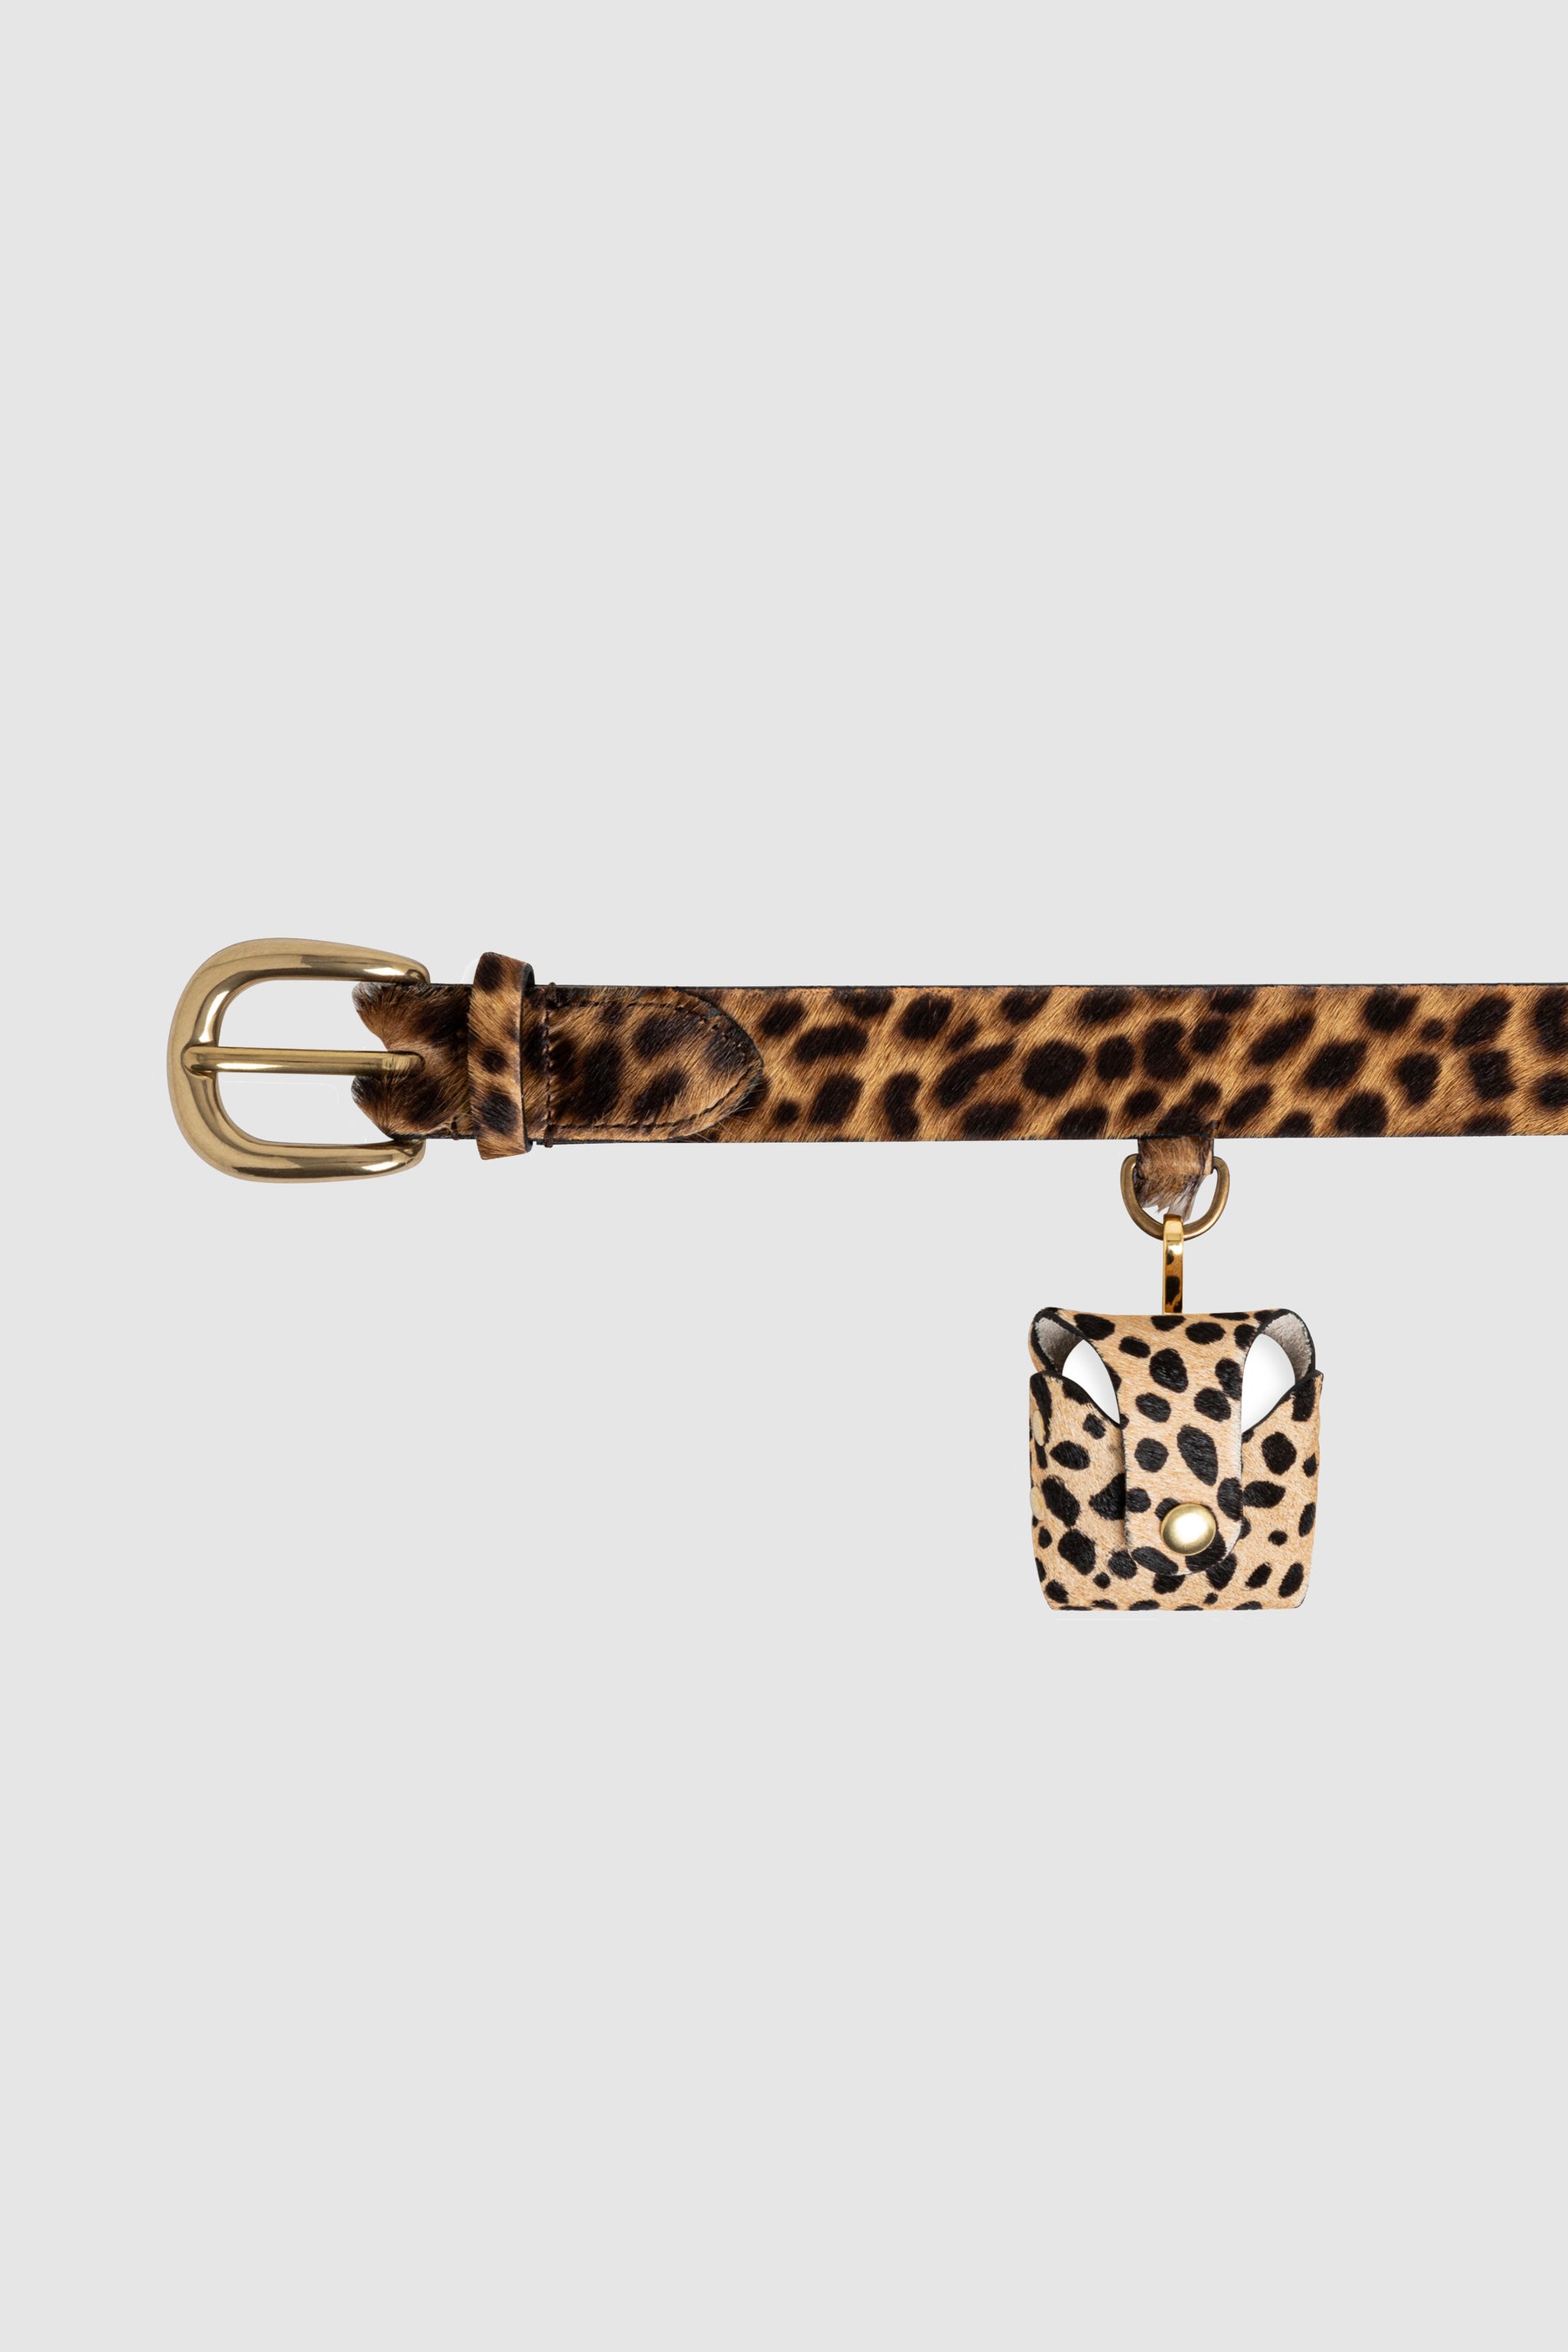 The Minis - Airpods case in Cheetah printed leather